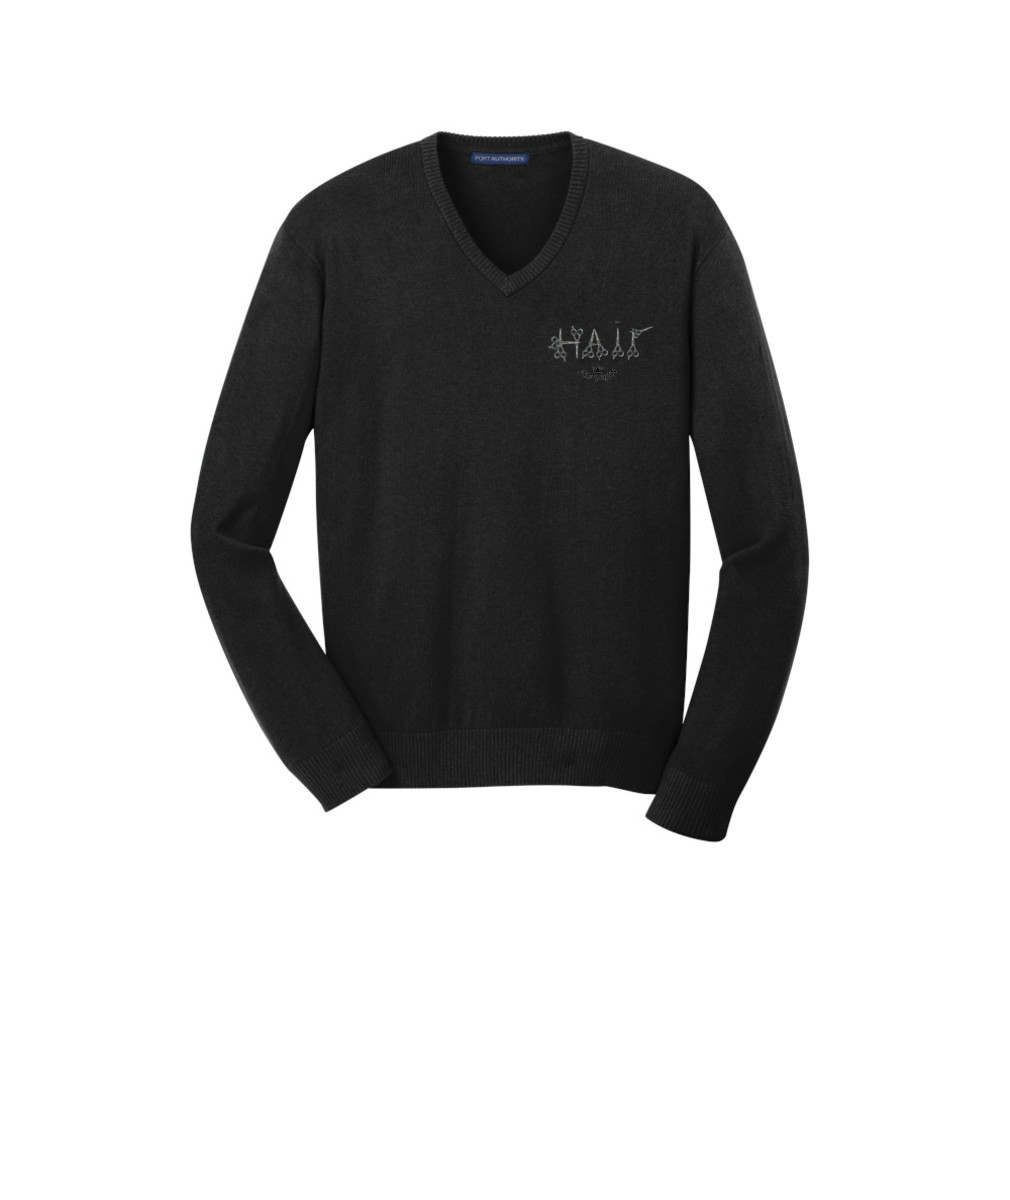 Hair print Port Authority® Embroidered  V-Neck Sweater